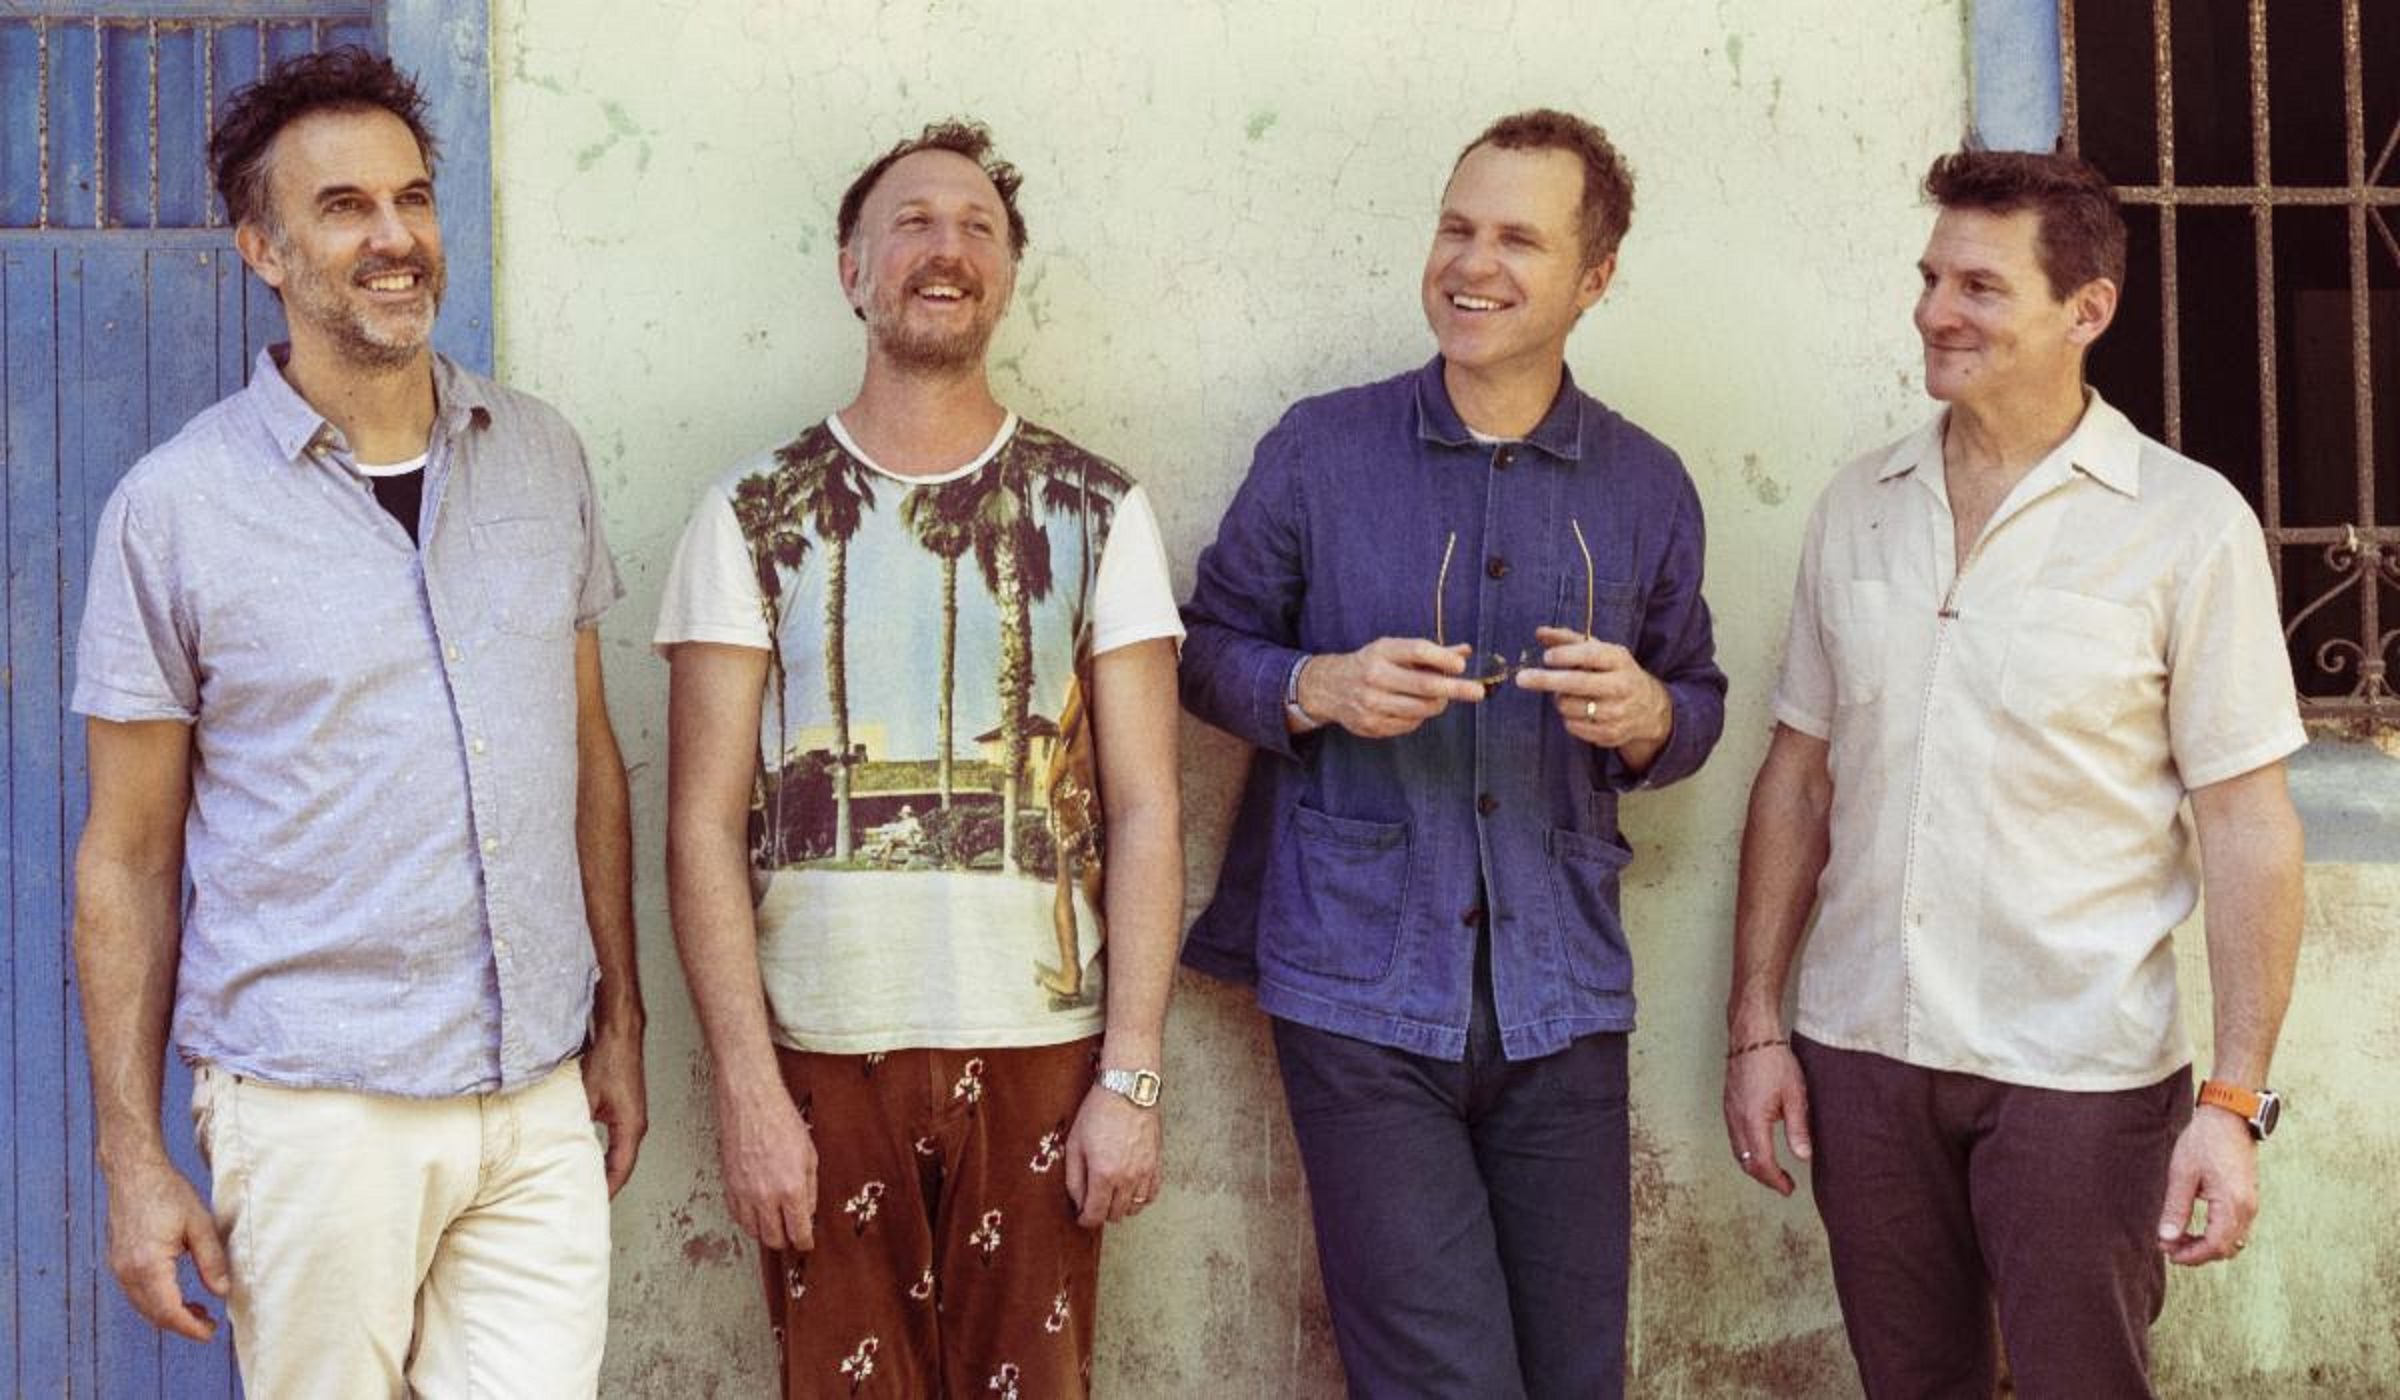 Guster's "Gorgeous and Idiosyncratic" New Album Out Today; "CBS Saturday Morning" Appearance Airs May 25